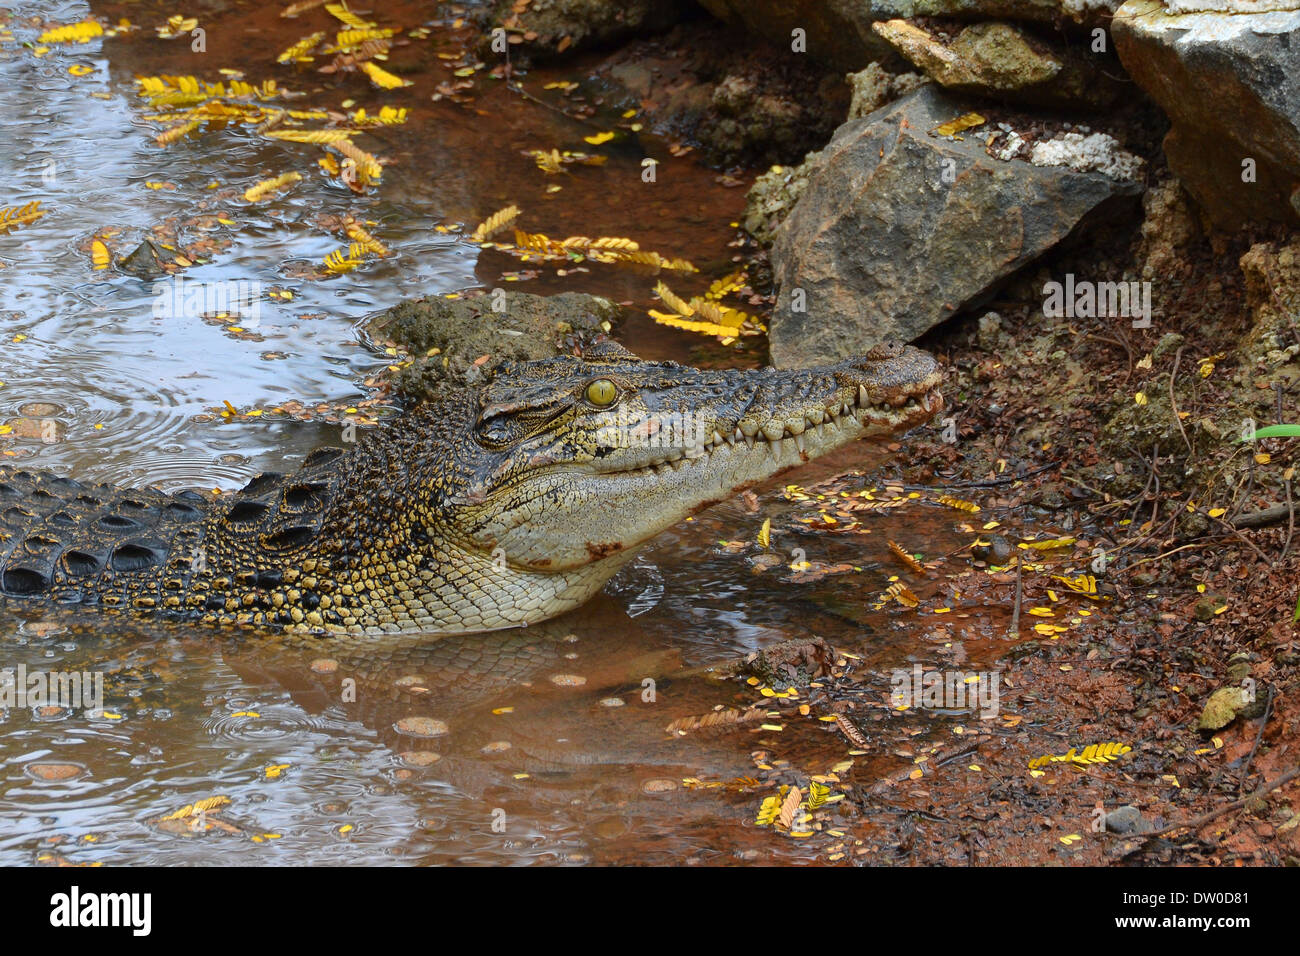 saltwater crocodile in the water Stock Photo